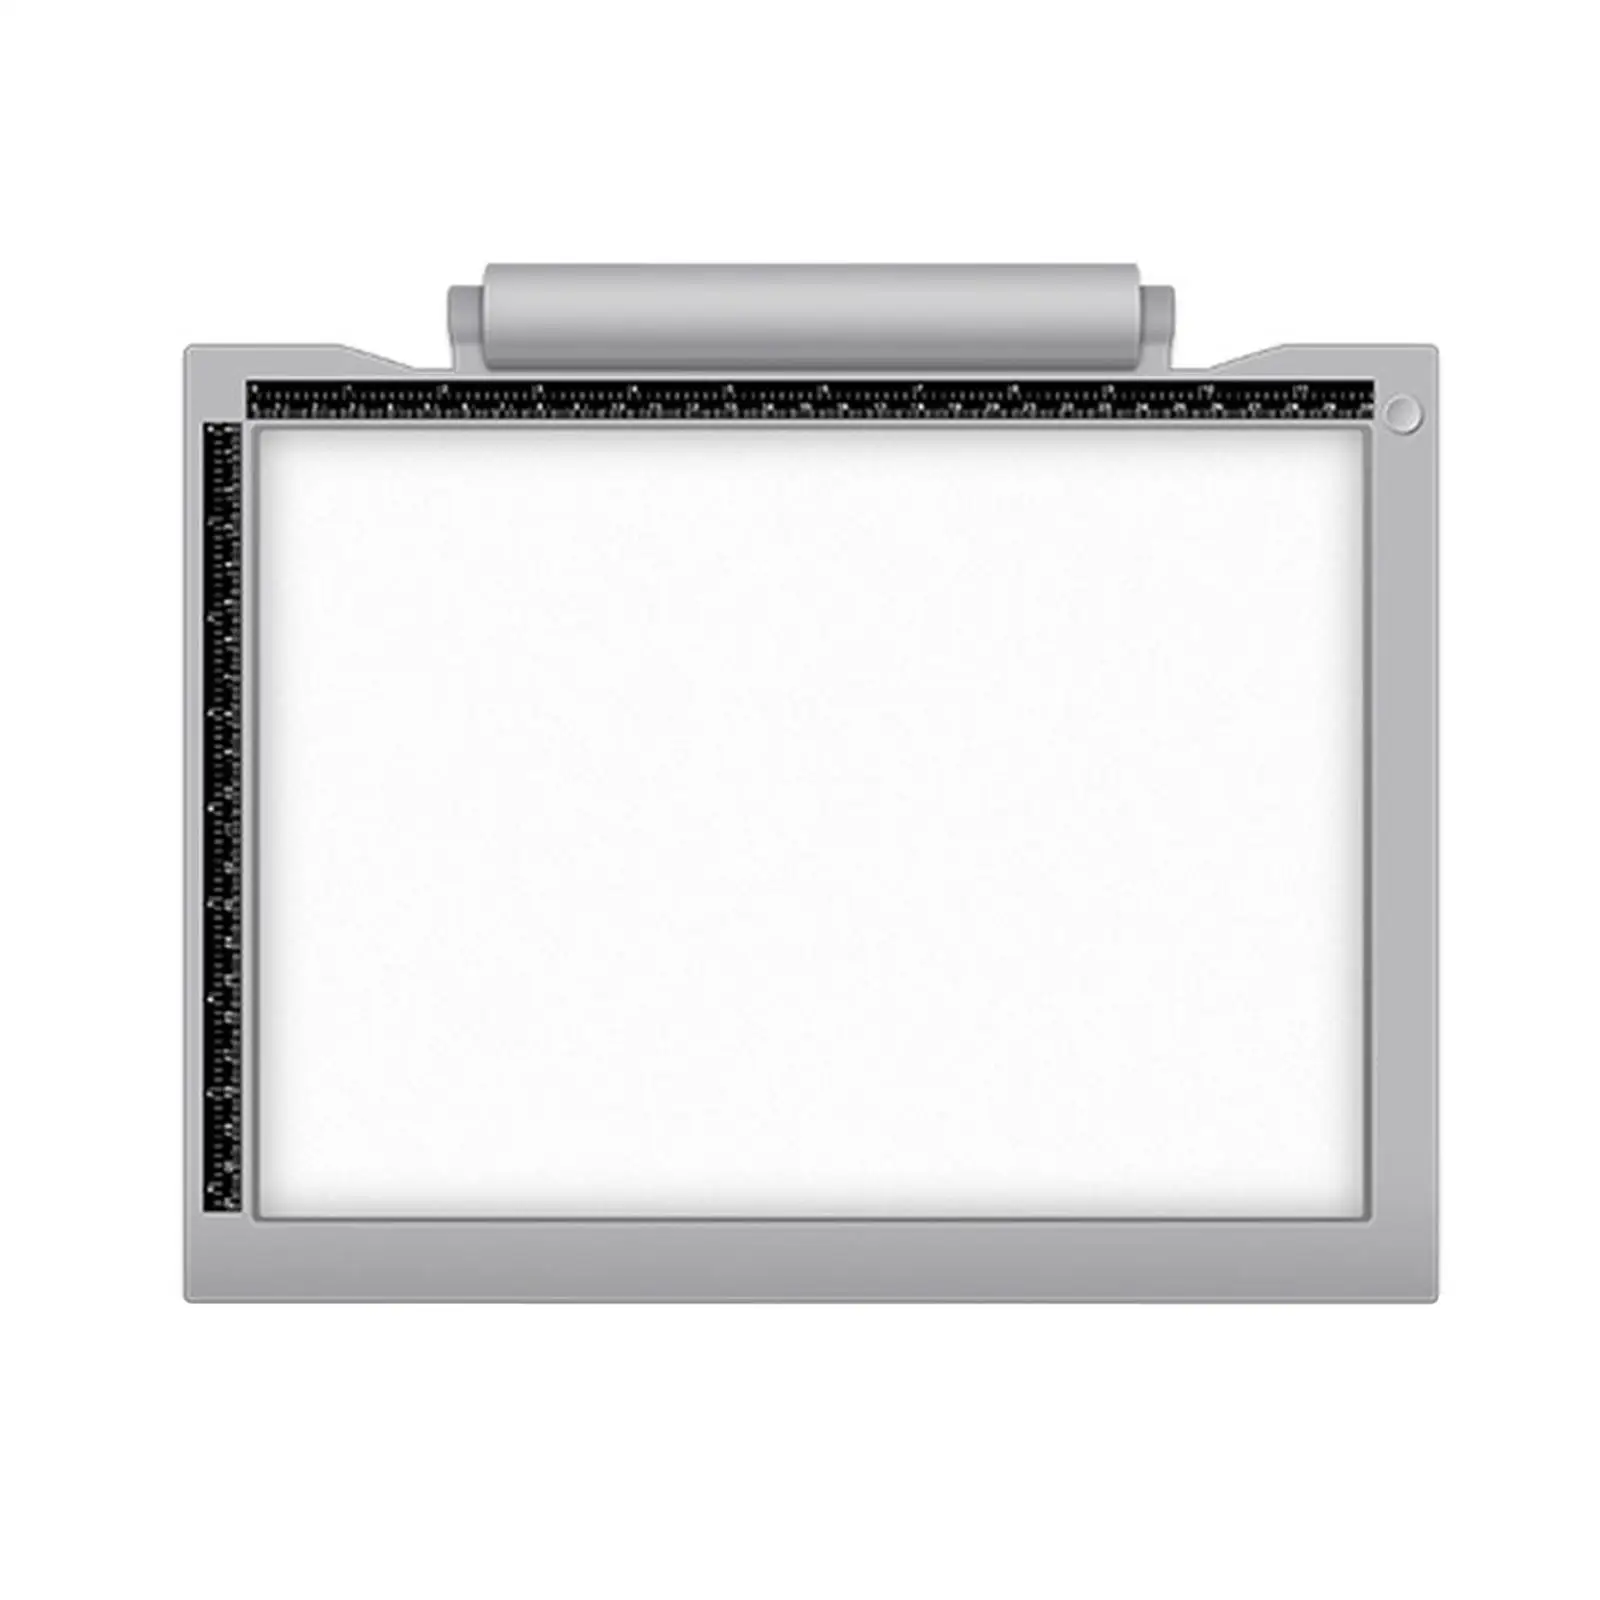 LED Copy Board Multipurpose Tracing Light Box Drawing Pad for Scrapbooking Calligraphy Travel Toy Sewing Projects Birthday Gifts